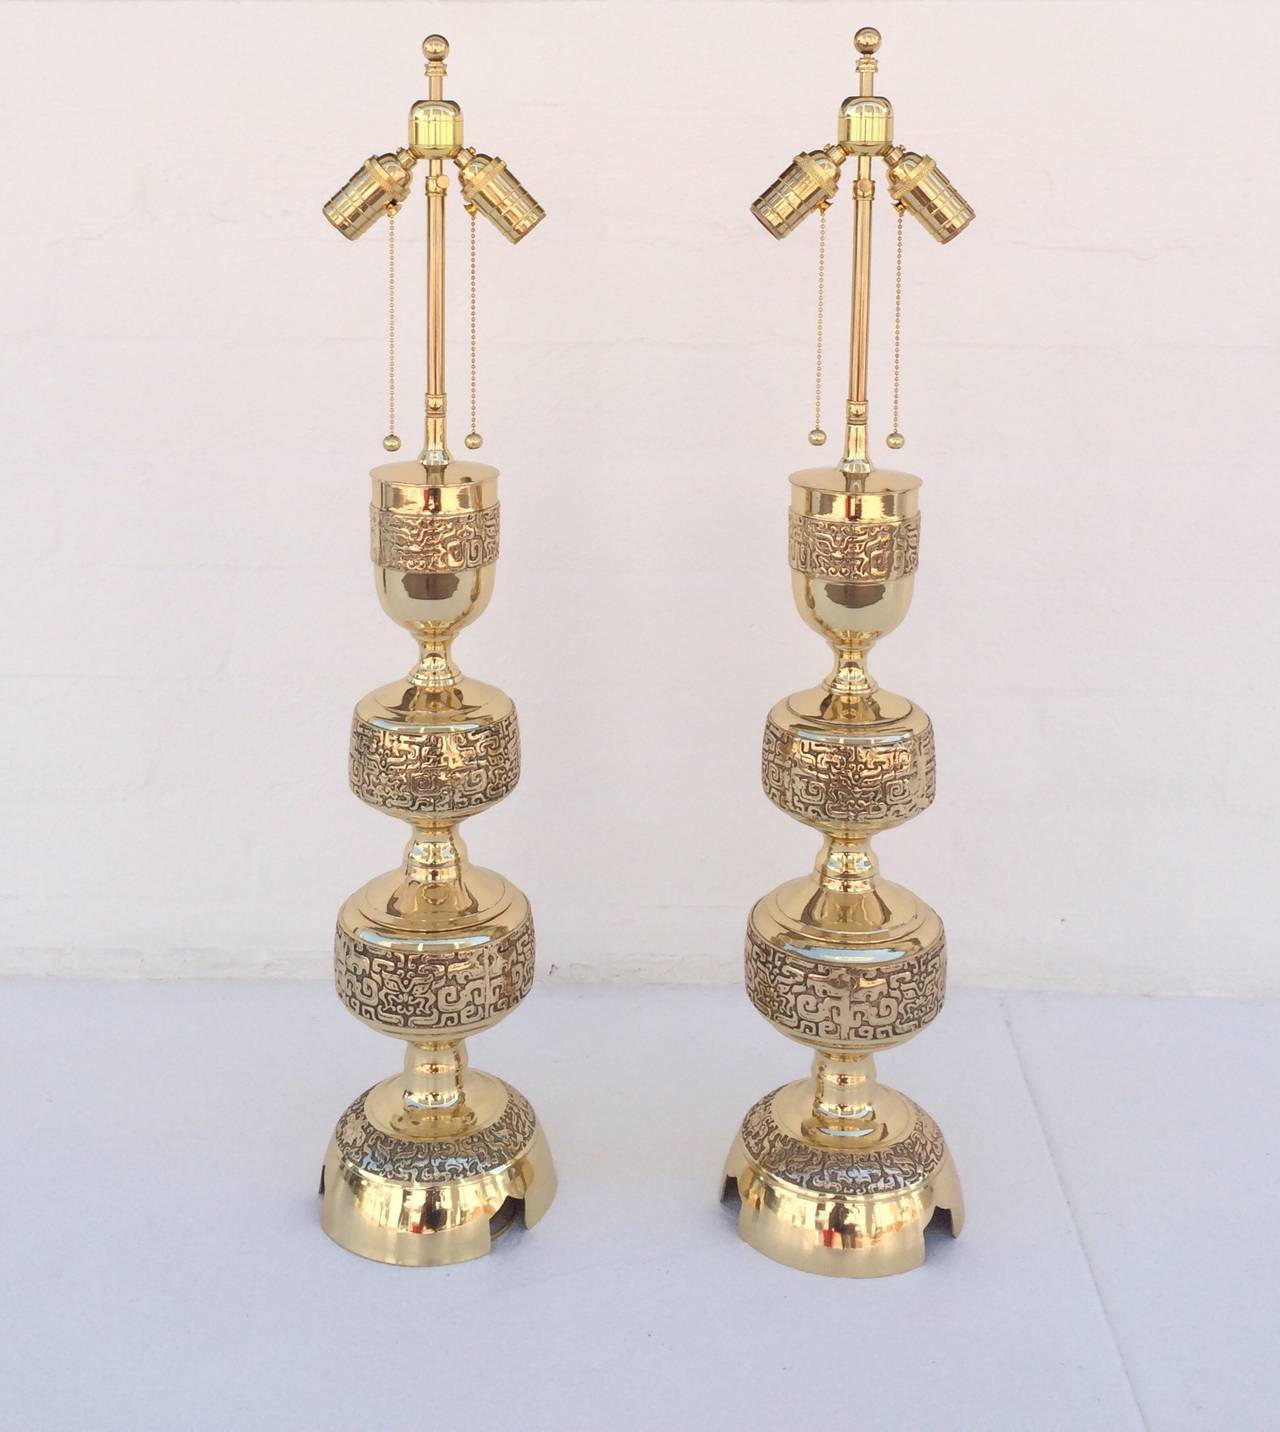 Mid-20th Century Pair of Polished Brass Table Lamps in the Style of James Mont